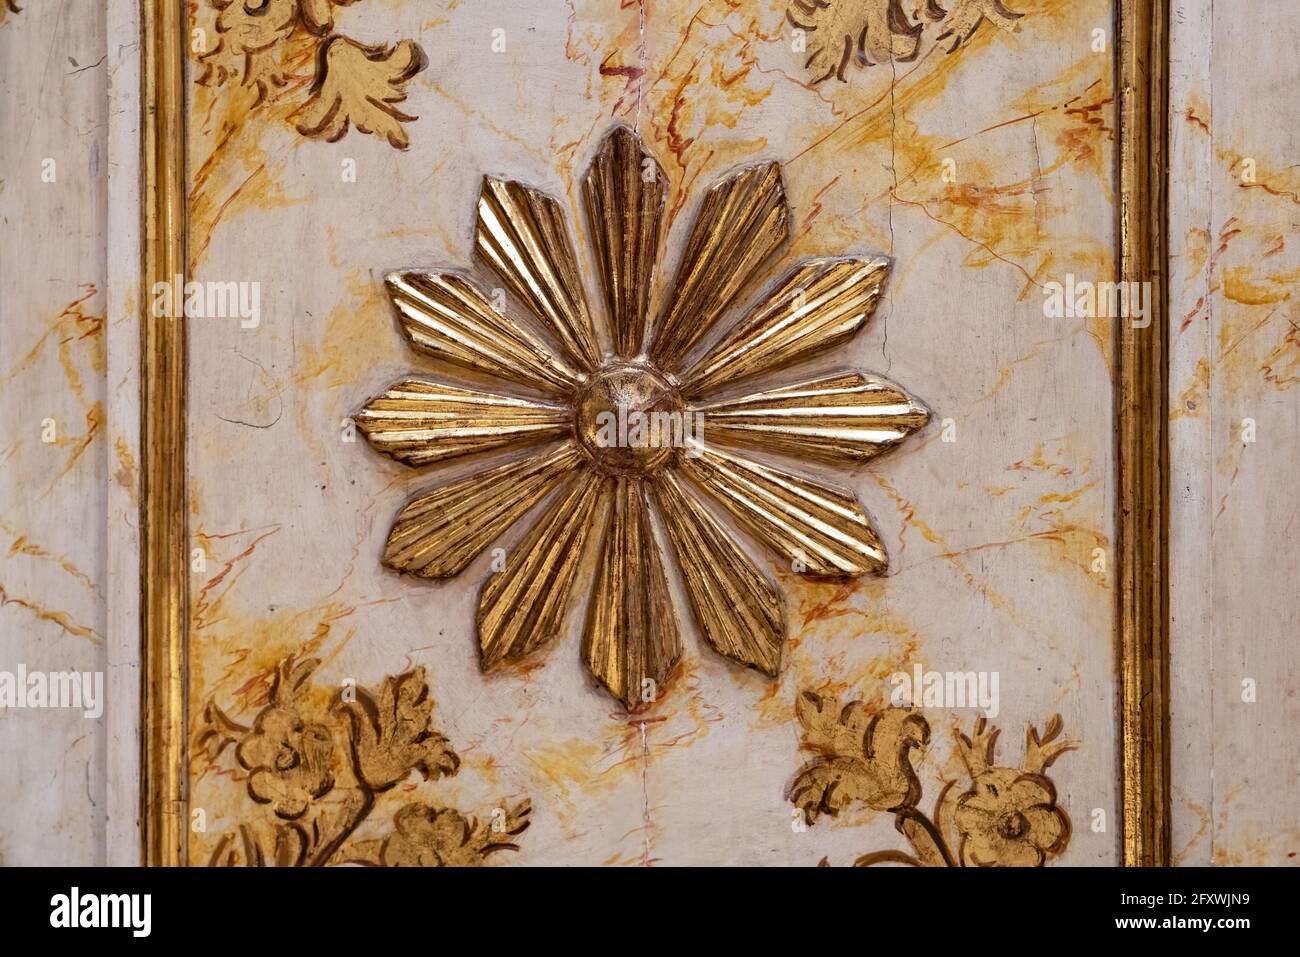 Daisy flower carved in gold color over wood Stock Photo